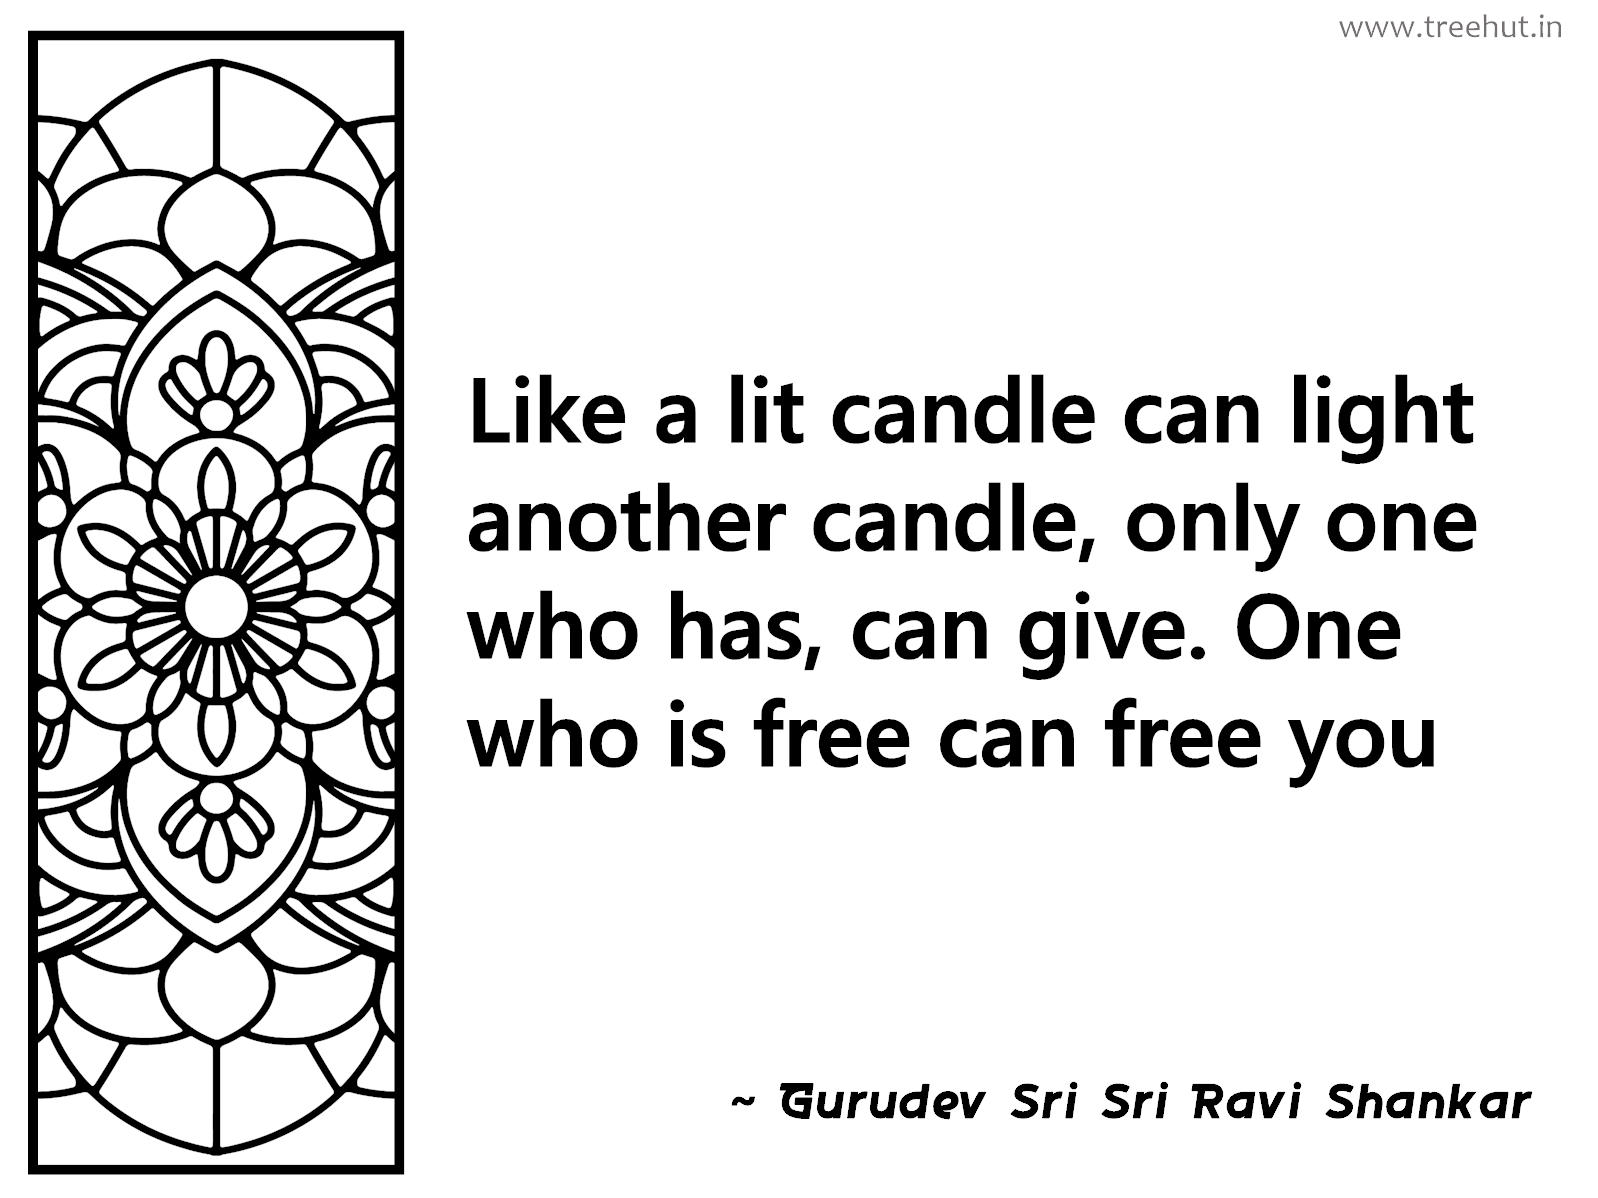 Like a lit candle can light another candle, only one who has, can give. One who is free can free you Inspirational Quote by Gurudev Sri Sri Ravi Shankar, coloring pages